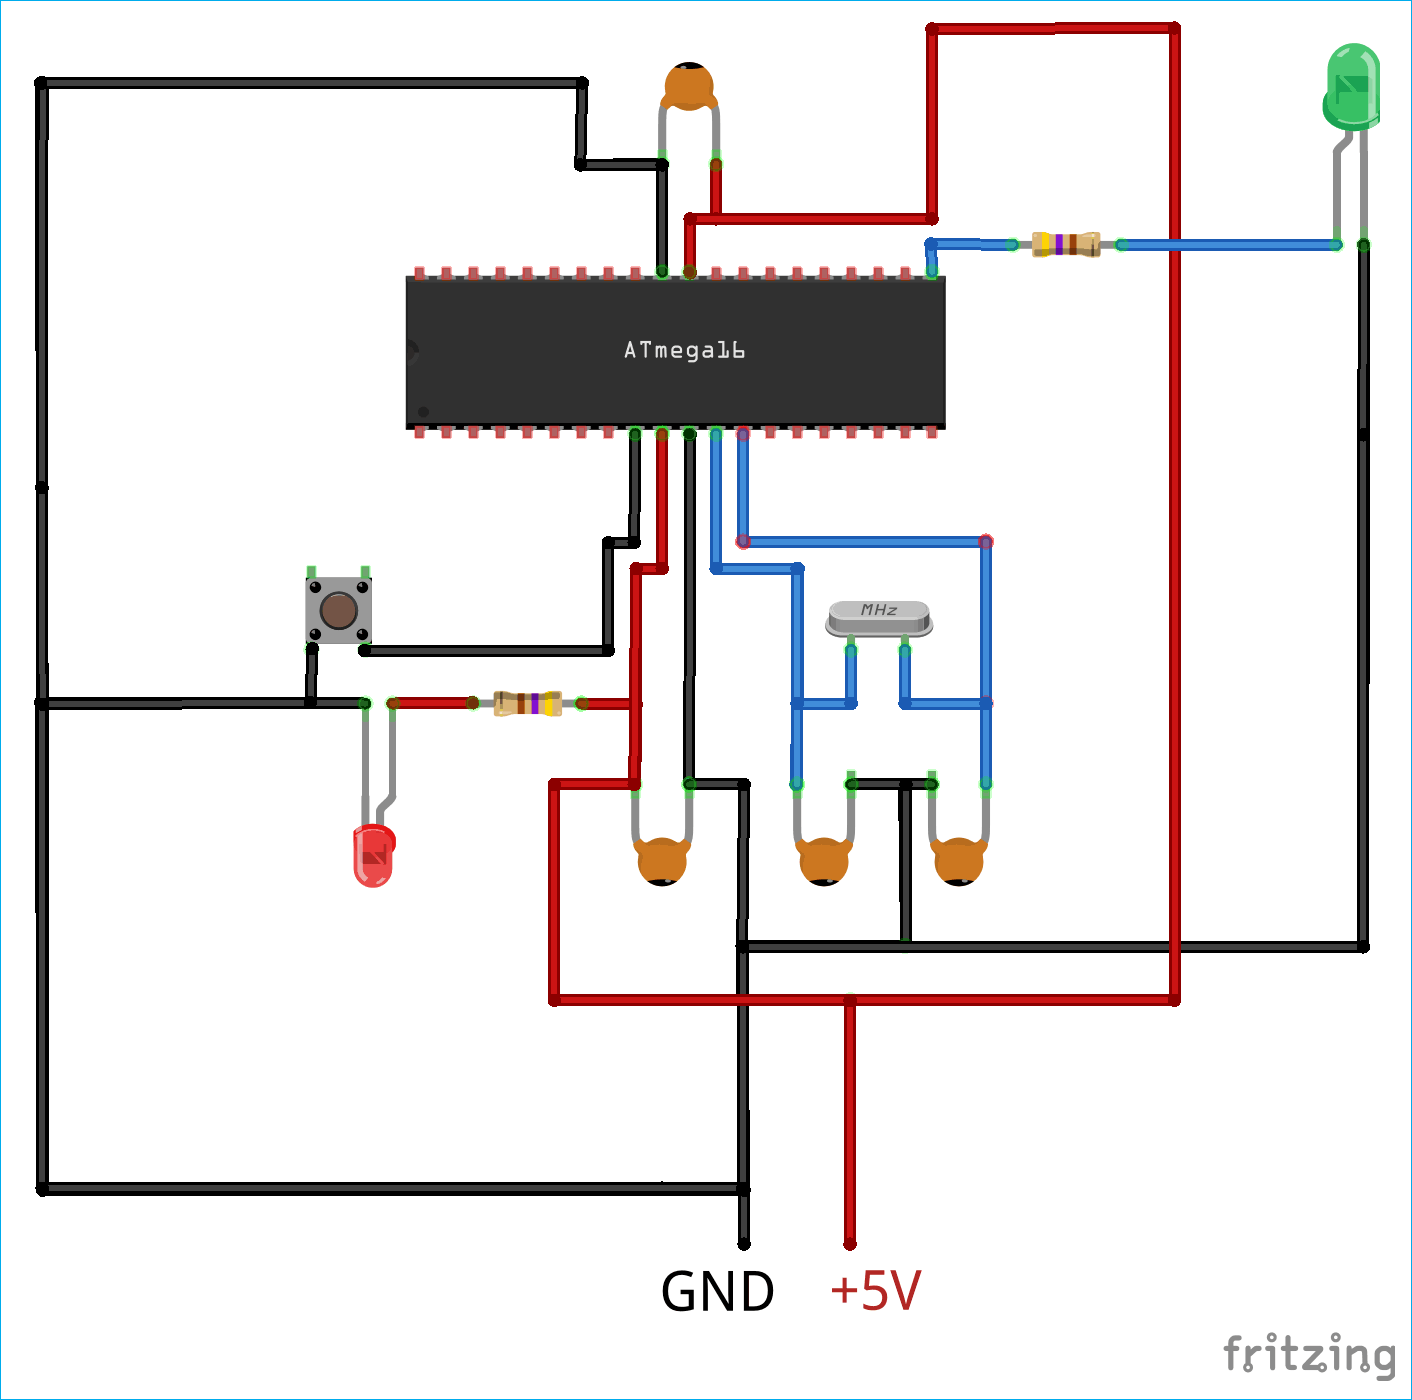 Circuit Diagram for using PWM with AVR Microcontroller Atmega16